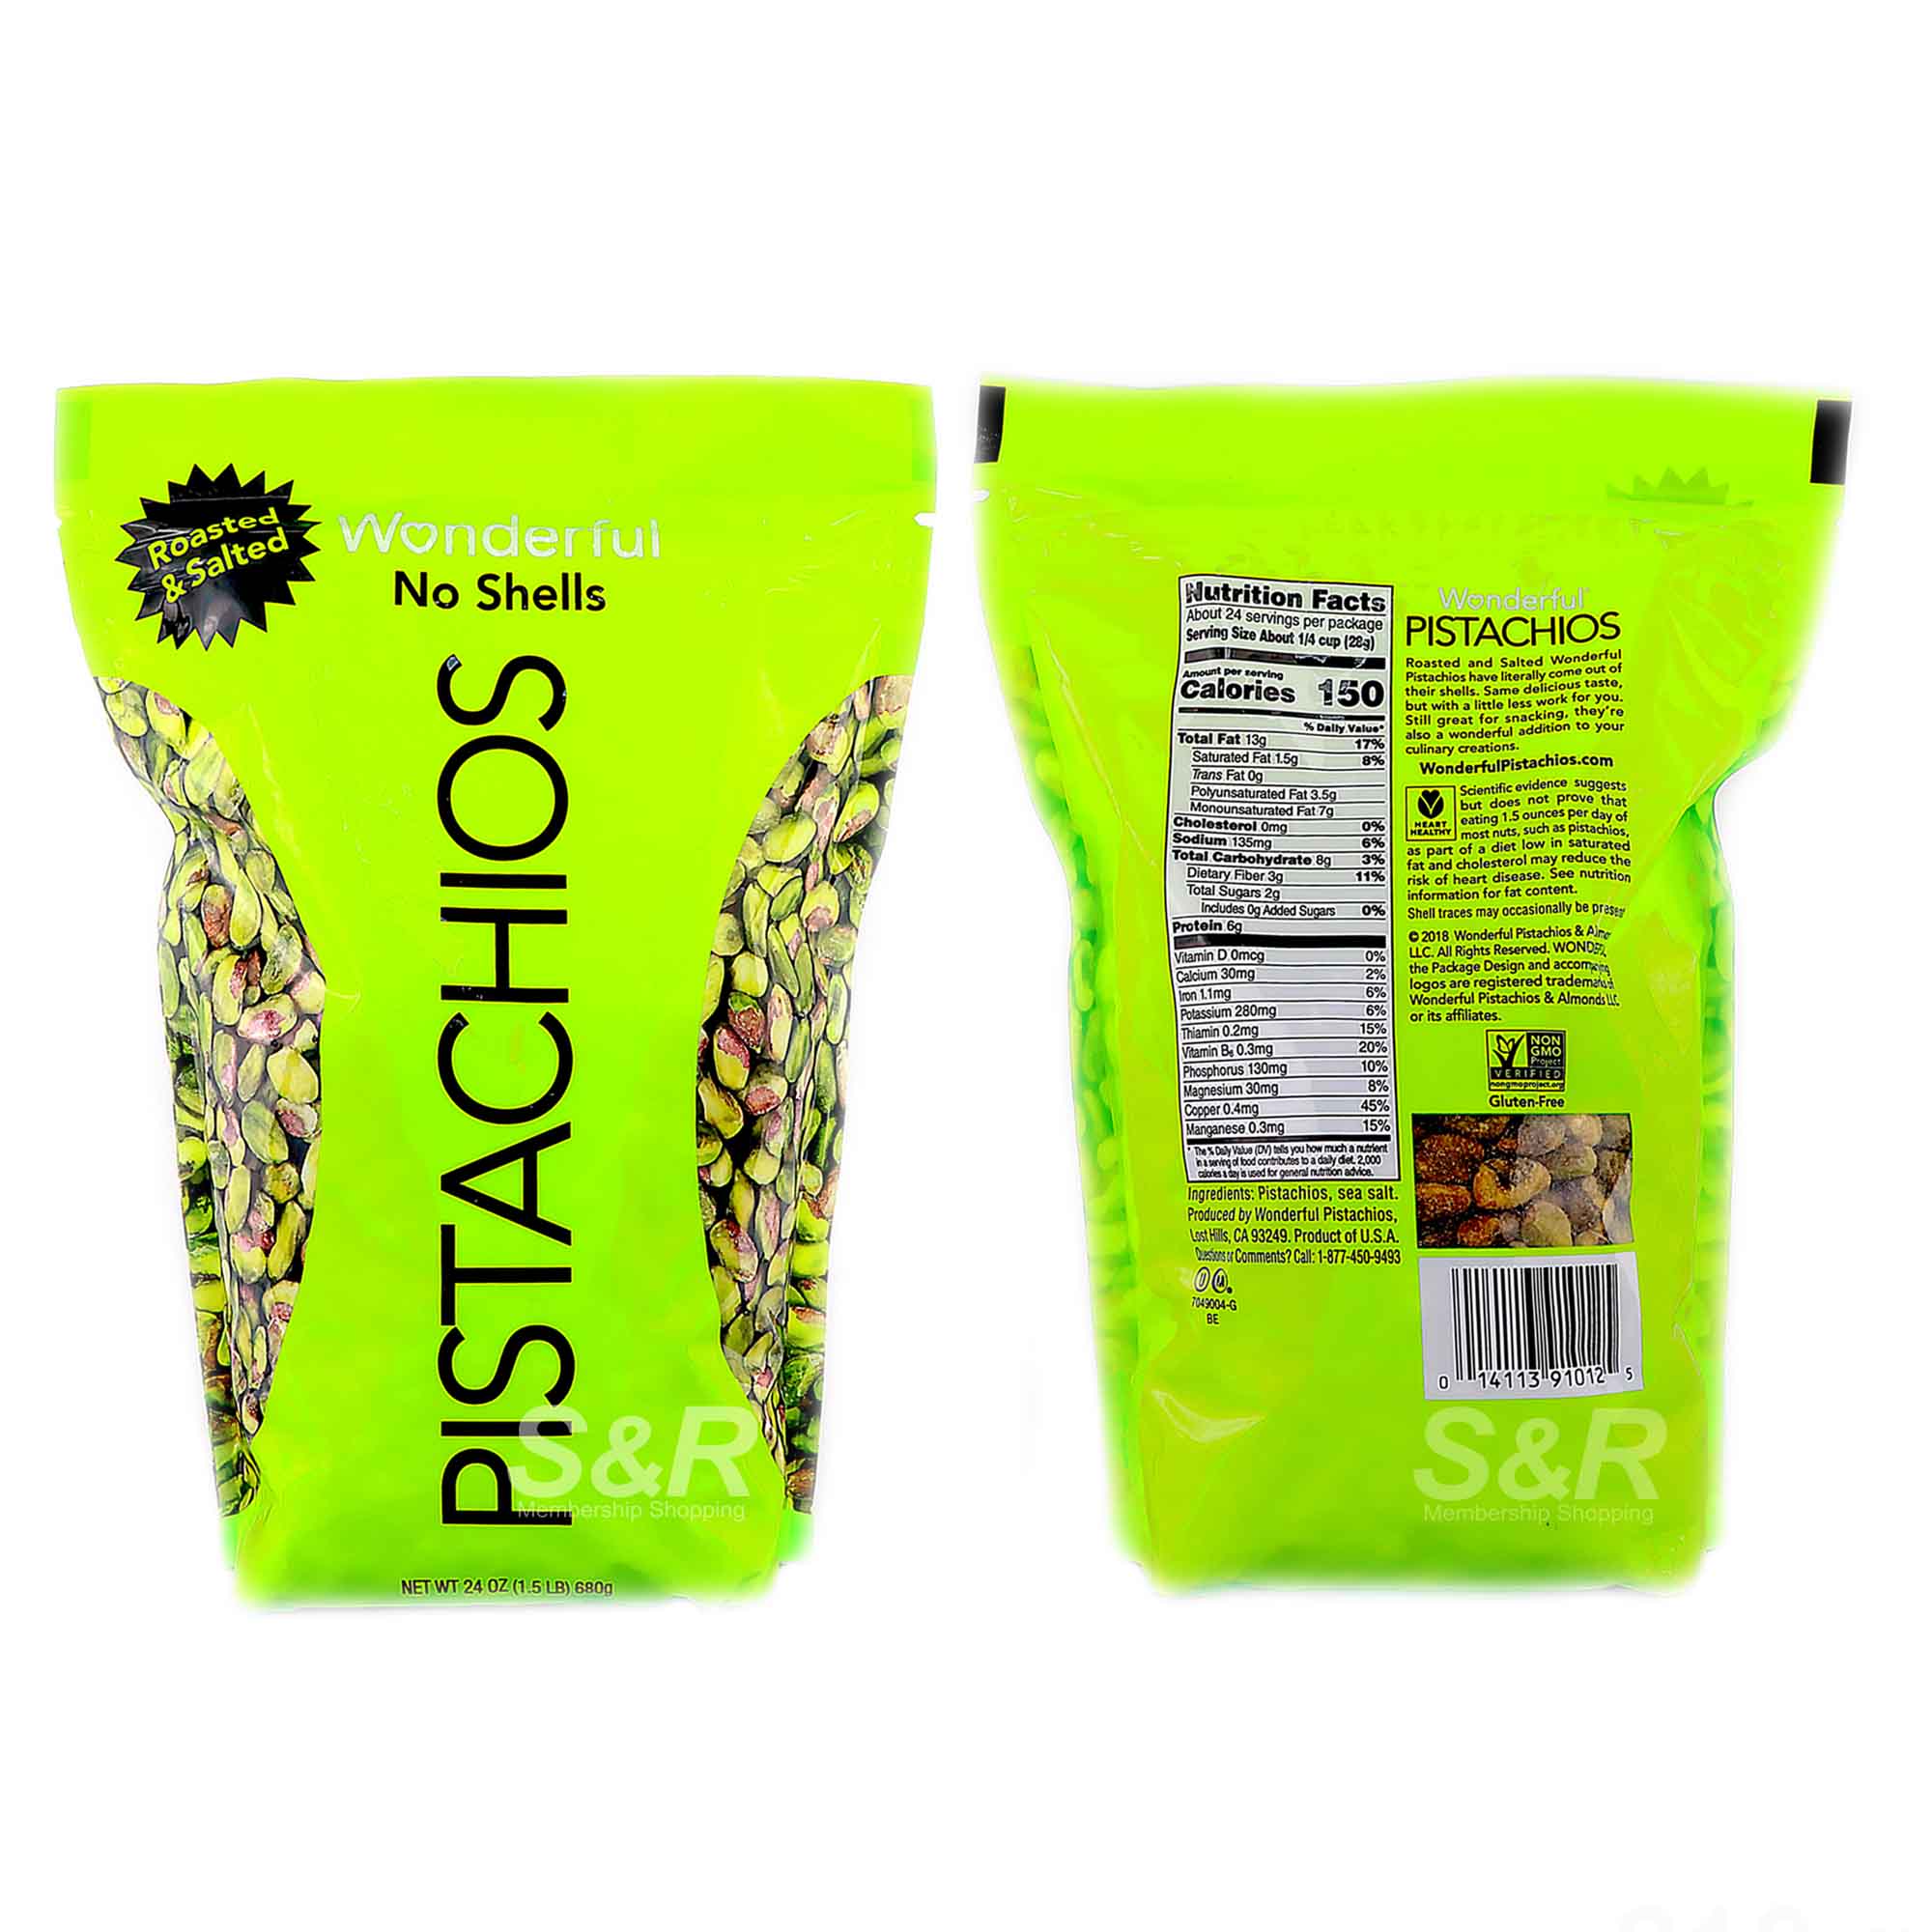 No Shells Roasted & Salted Pistachios